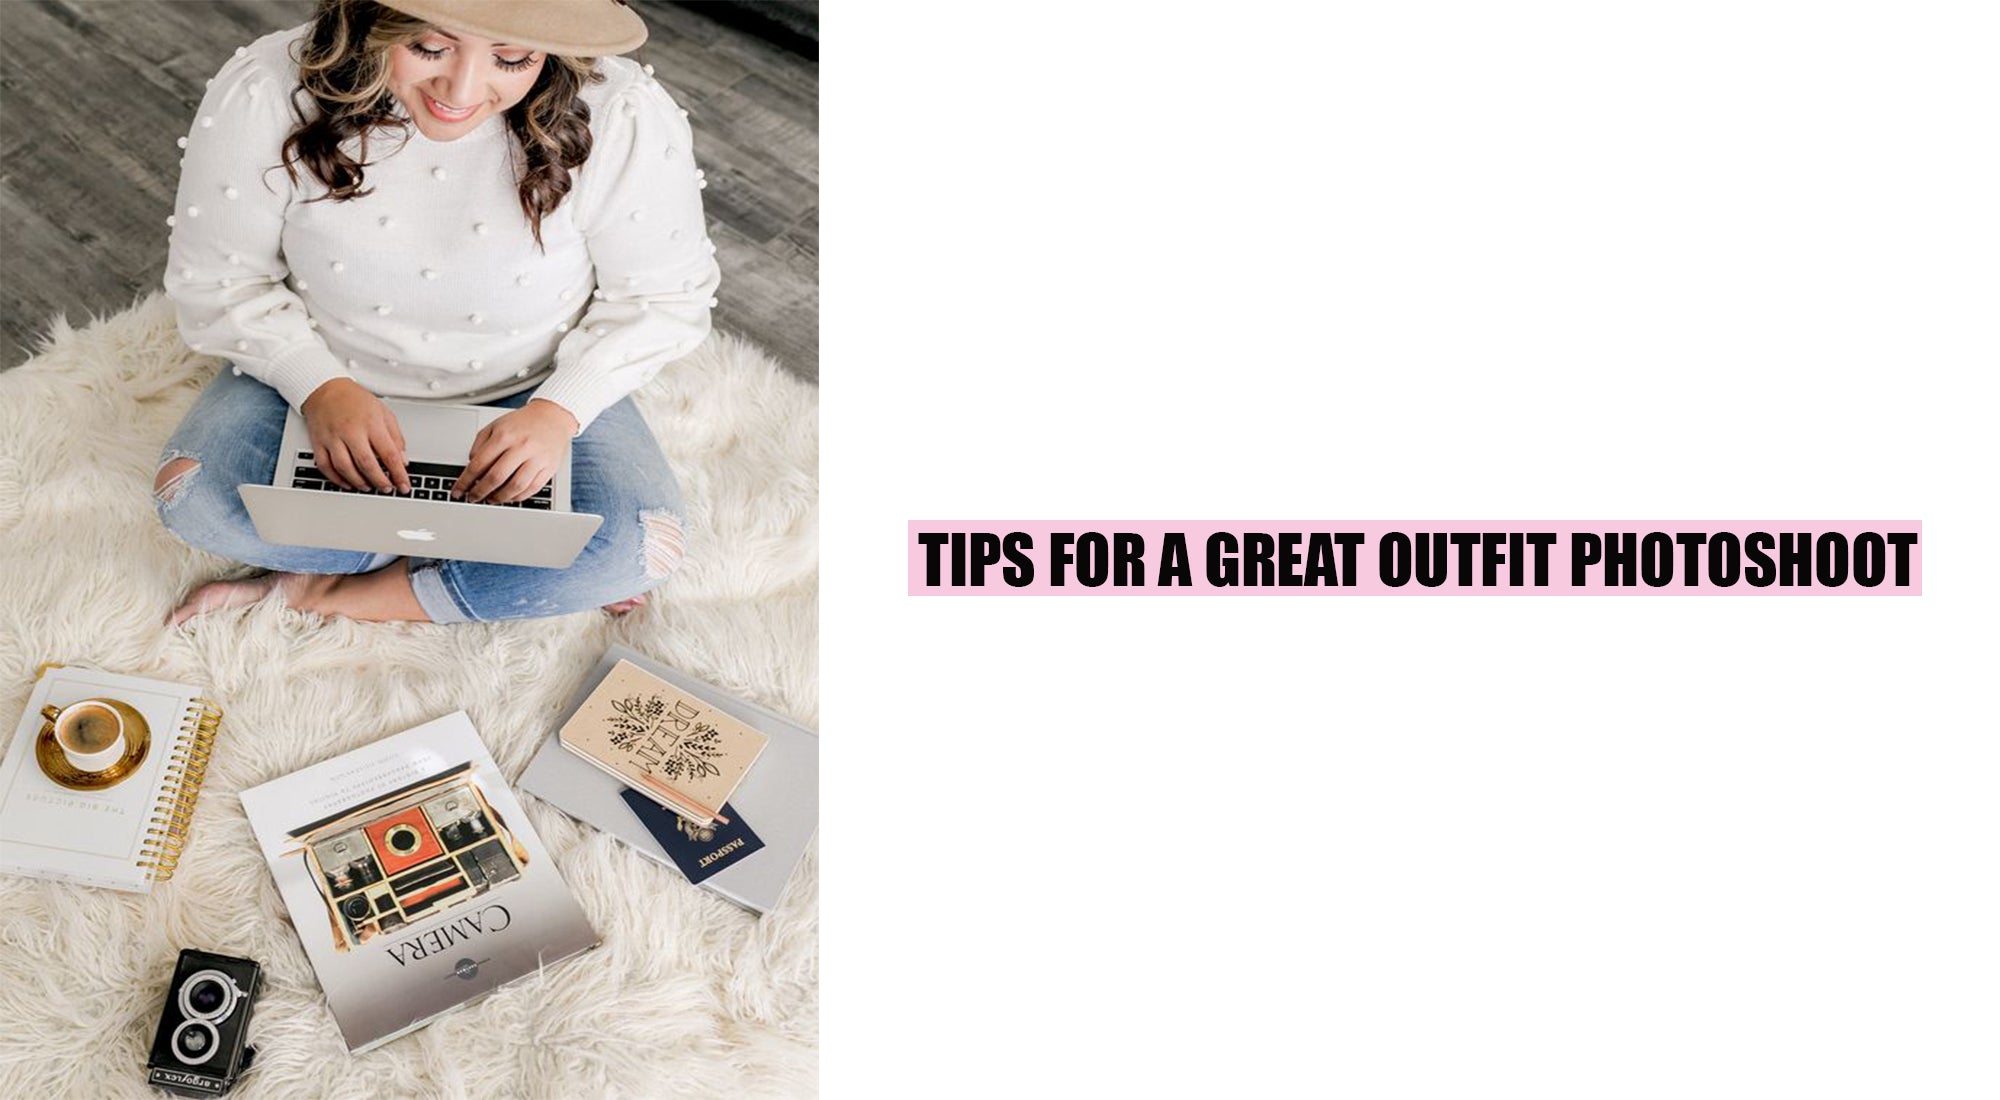 Tips For A Great Outfit Photoshoot